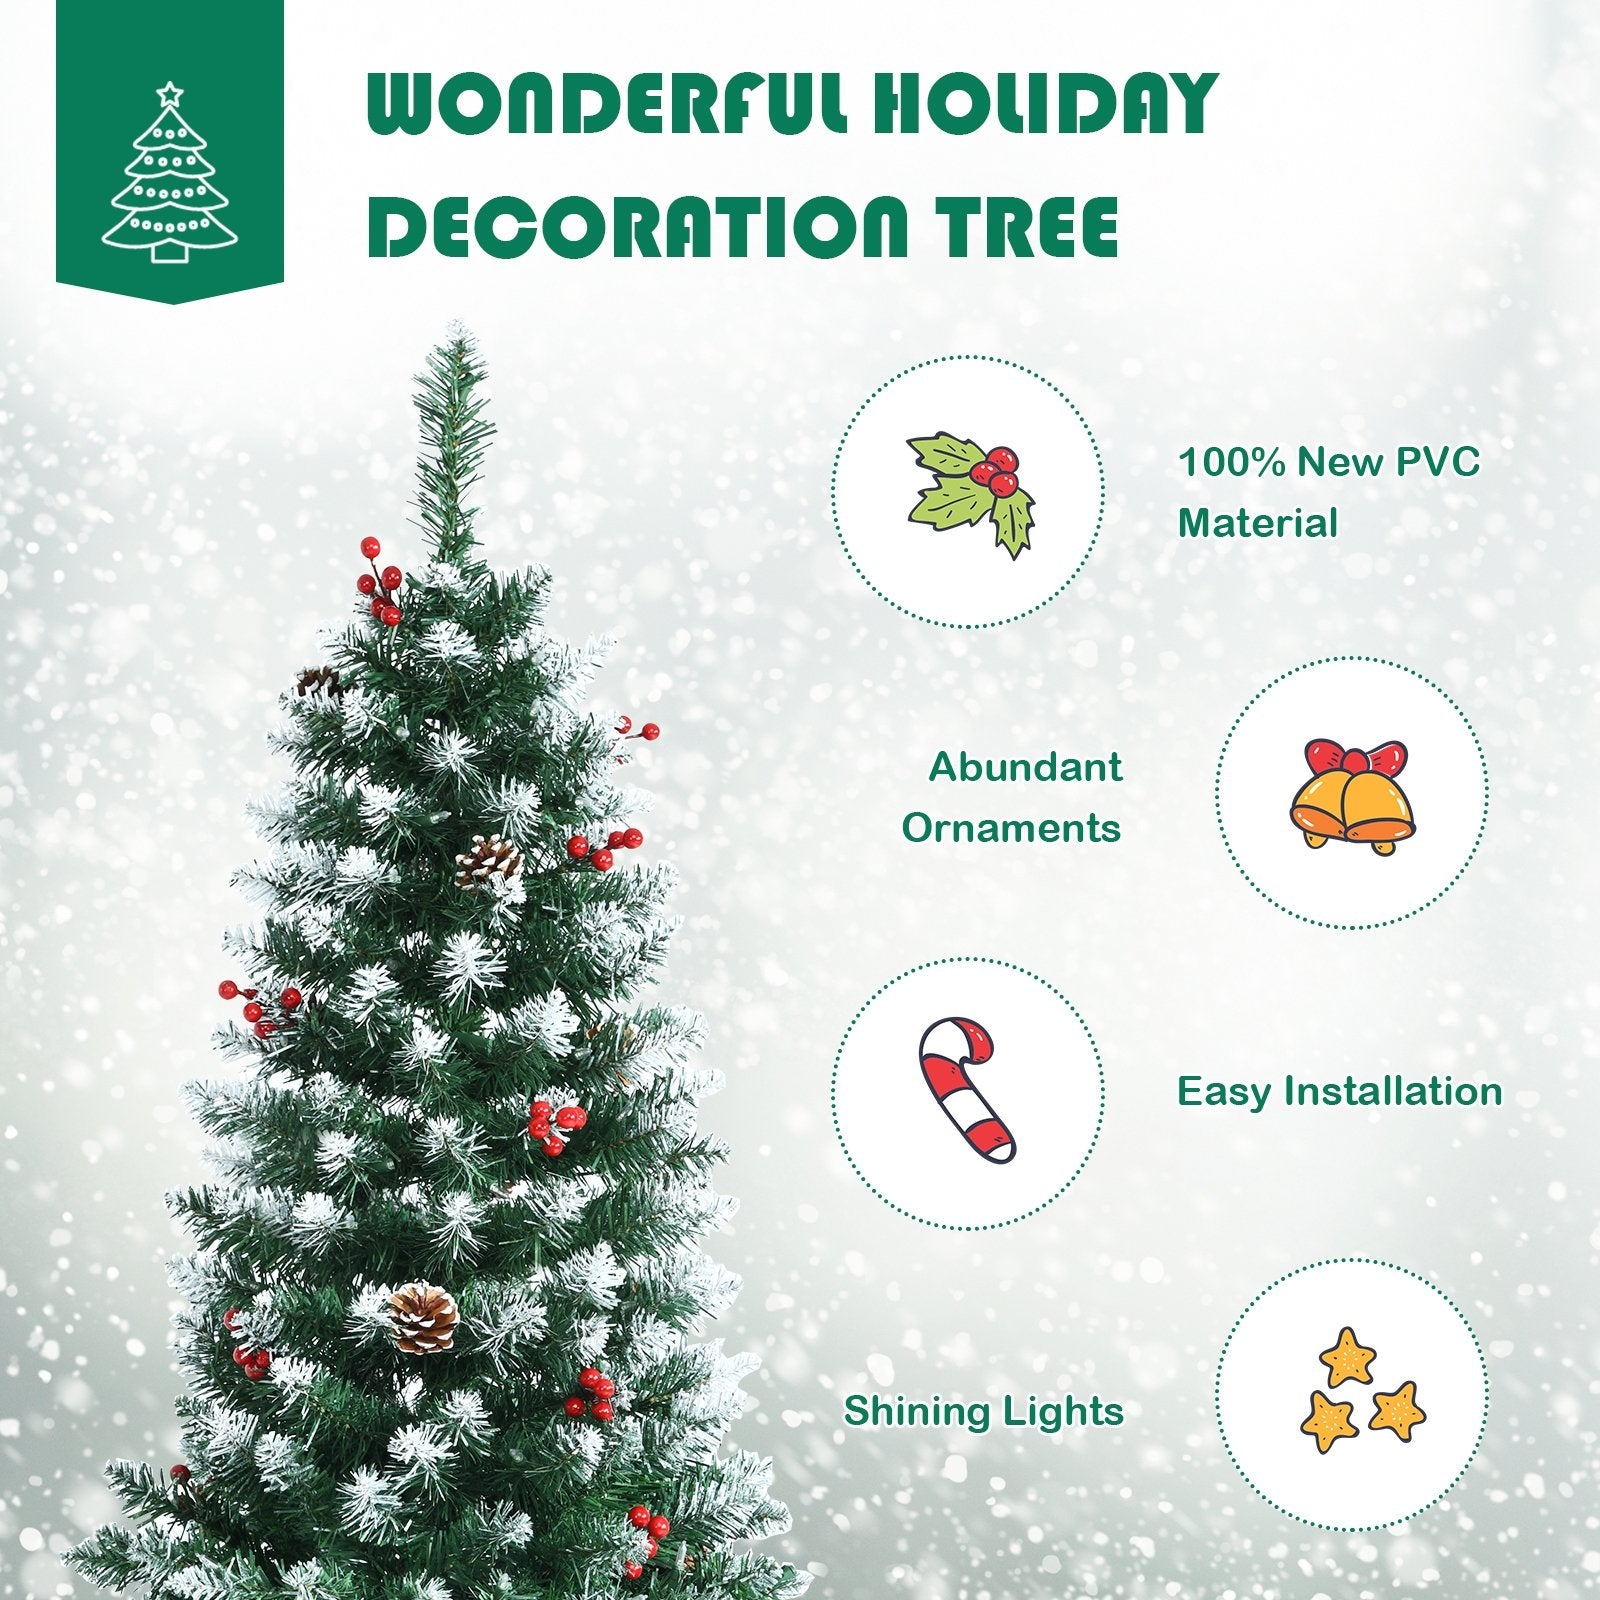 Pre-lit Artificial Pencil Christmas Tree with Pine Cones and Red Berries-7 ft, Green - Gallery Canada